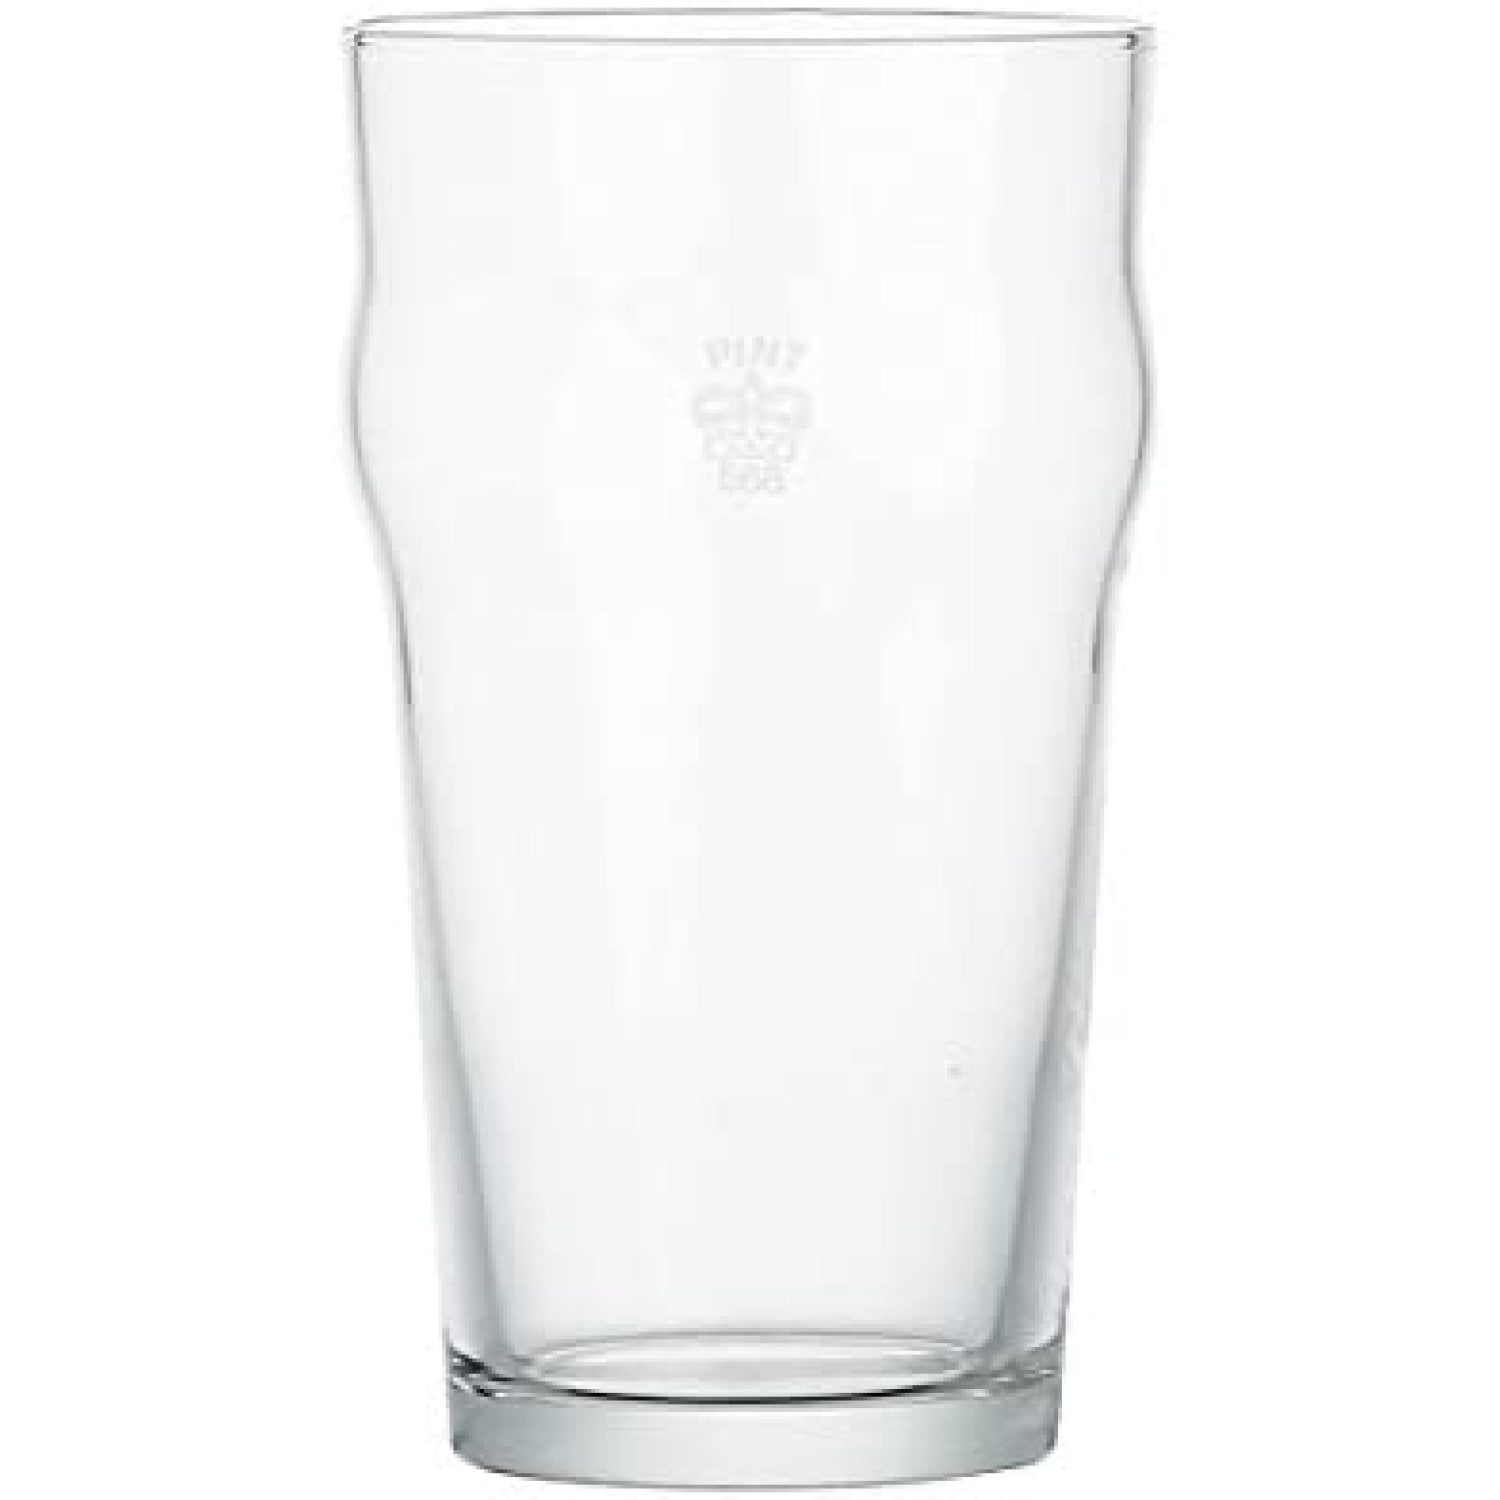 Nonic Pint Glass Dimensions & Drawings